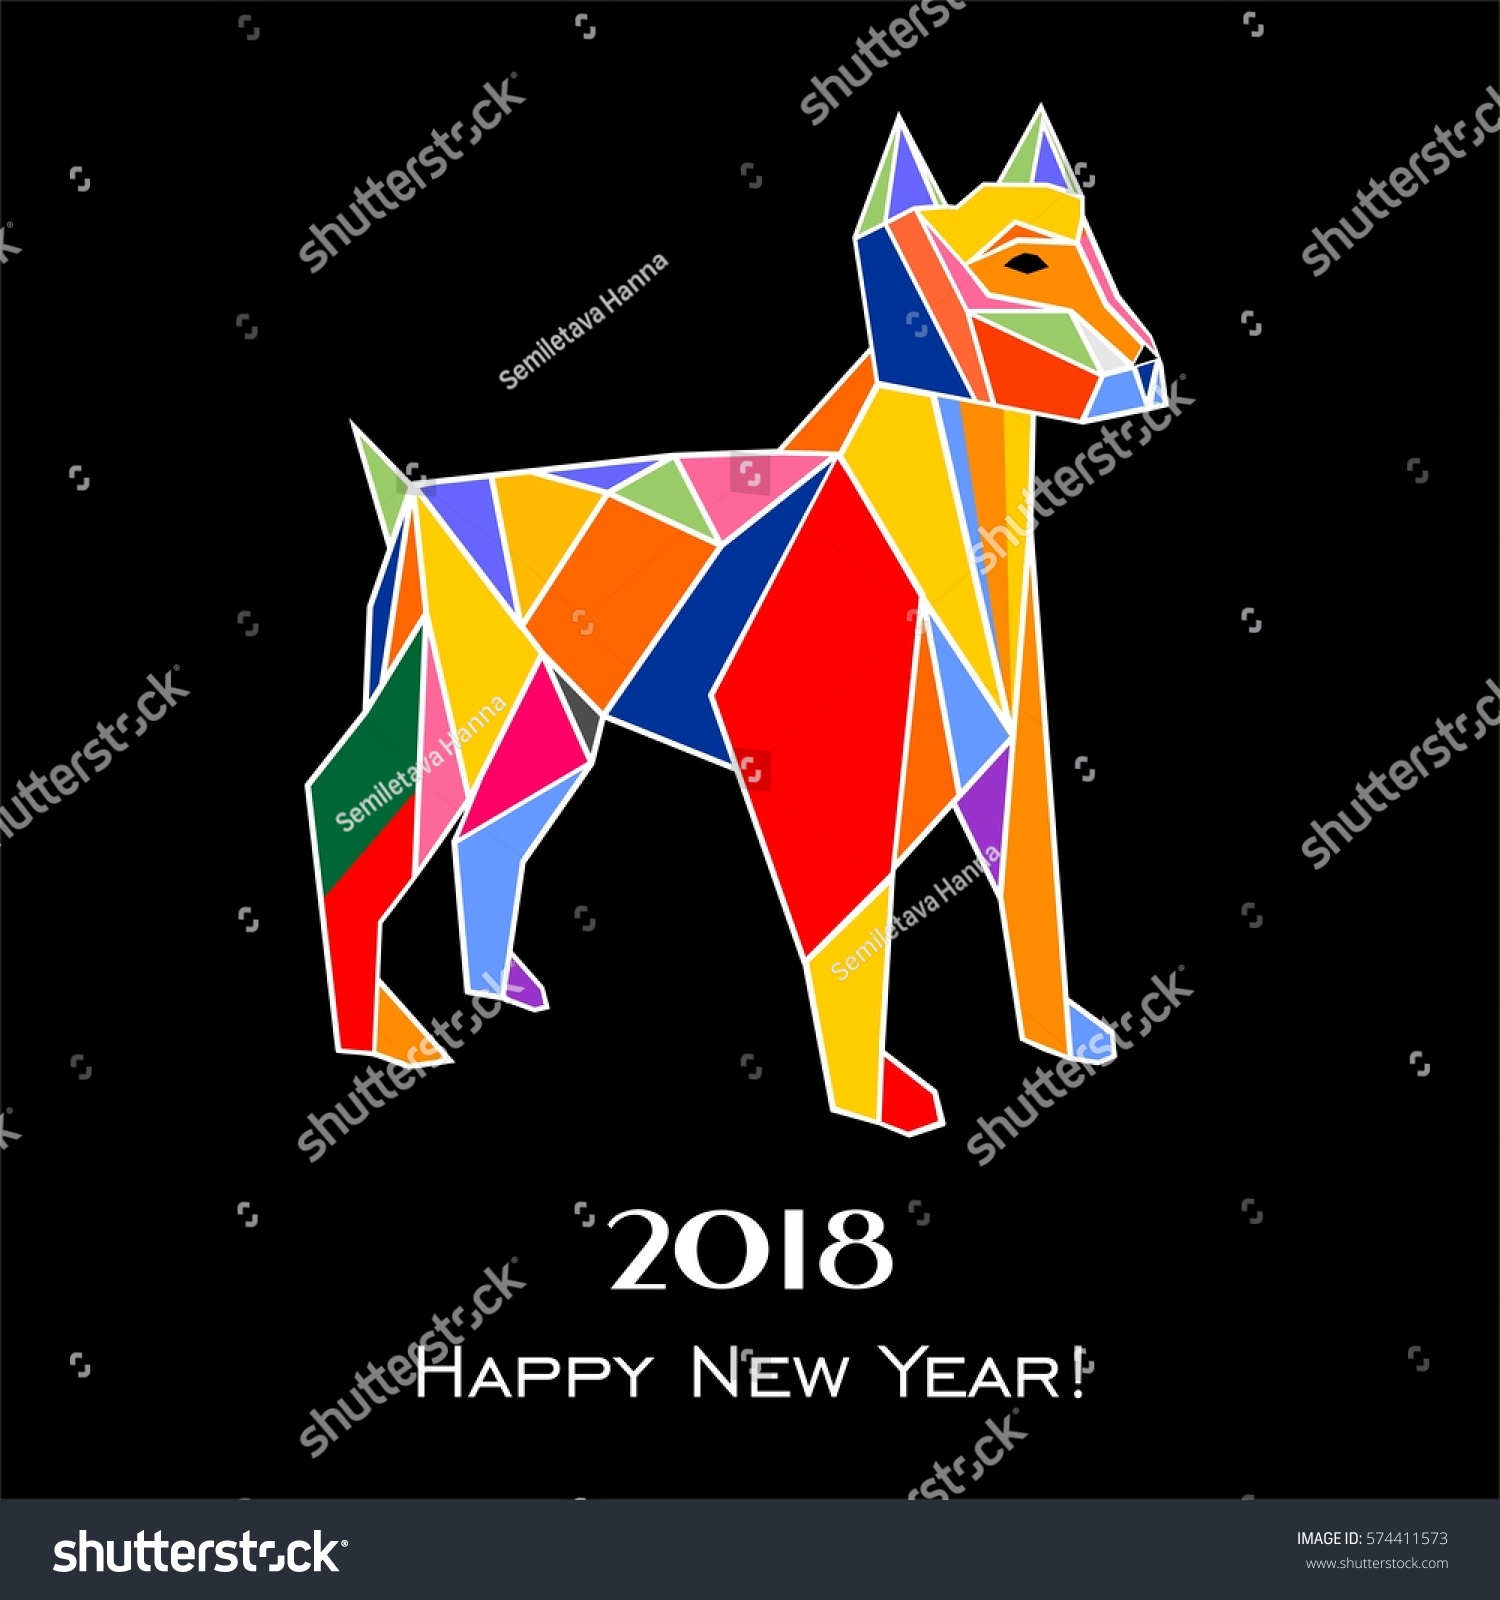 2018 Happy New Year Greeting Card Stock Vector 574411573 ...